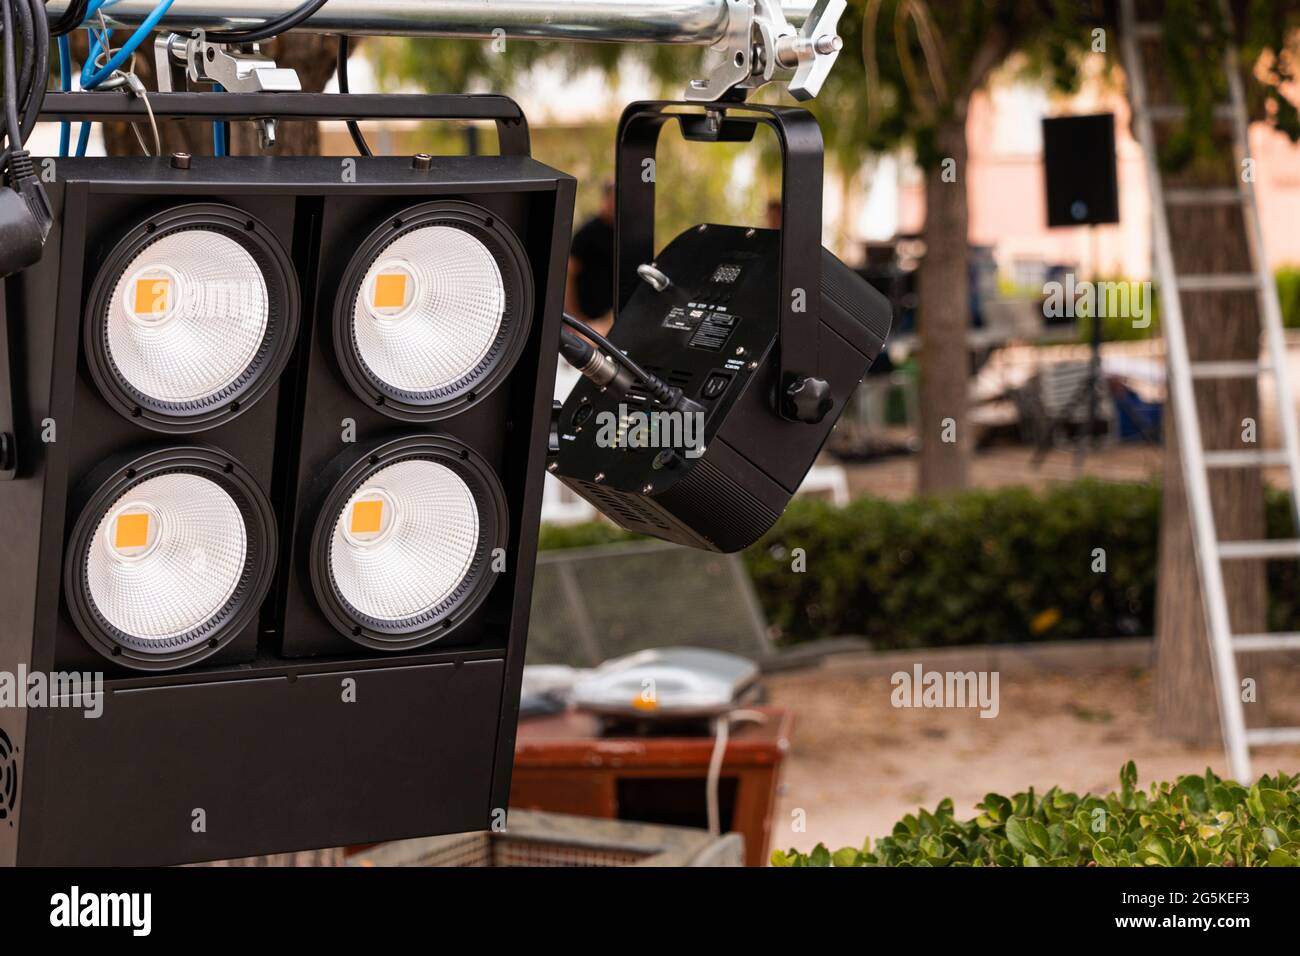 Lighting equipment being set up for a street show. In the foreground are spotlights and in the background, out of focus, electronic equipment, loudspe Stock Photo